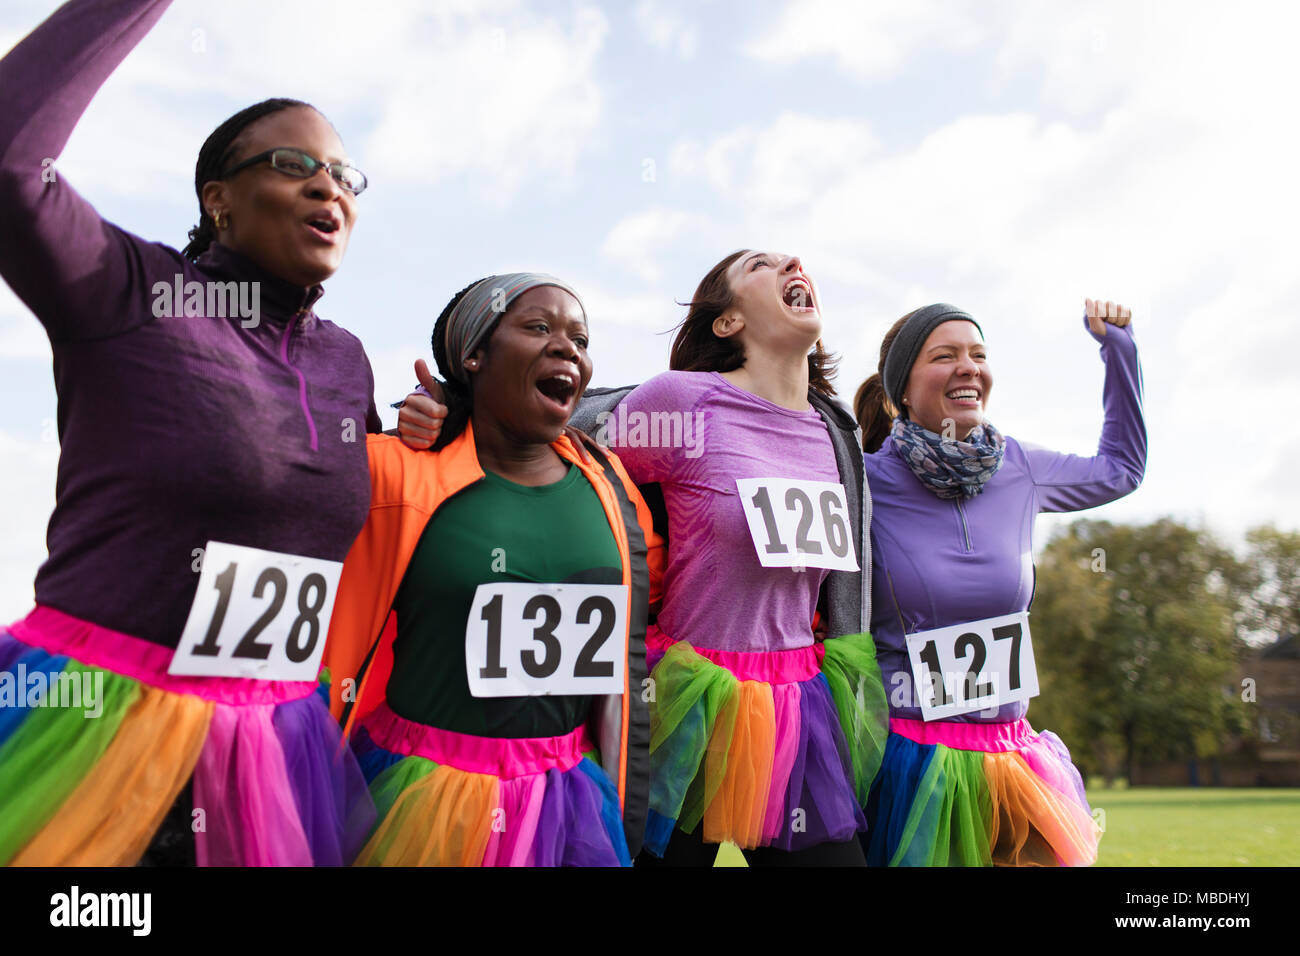 Enthusiastic female runner friends in tutus cheering at charity run Stock Photo